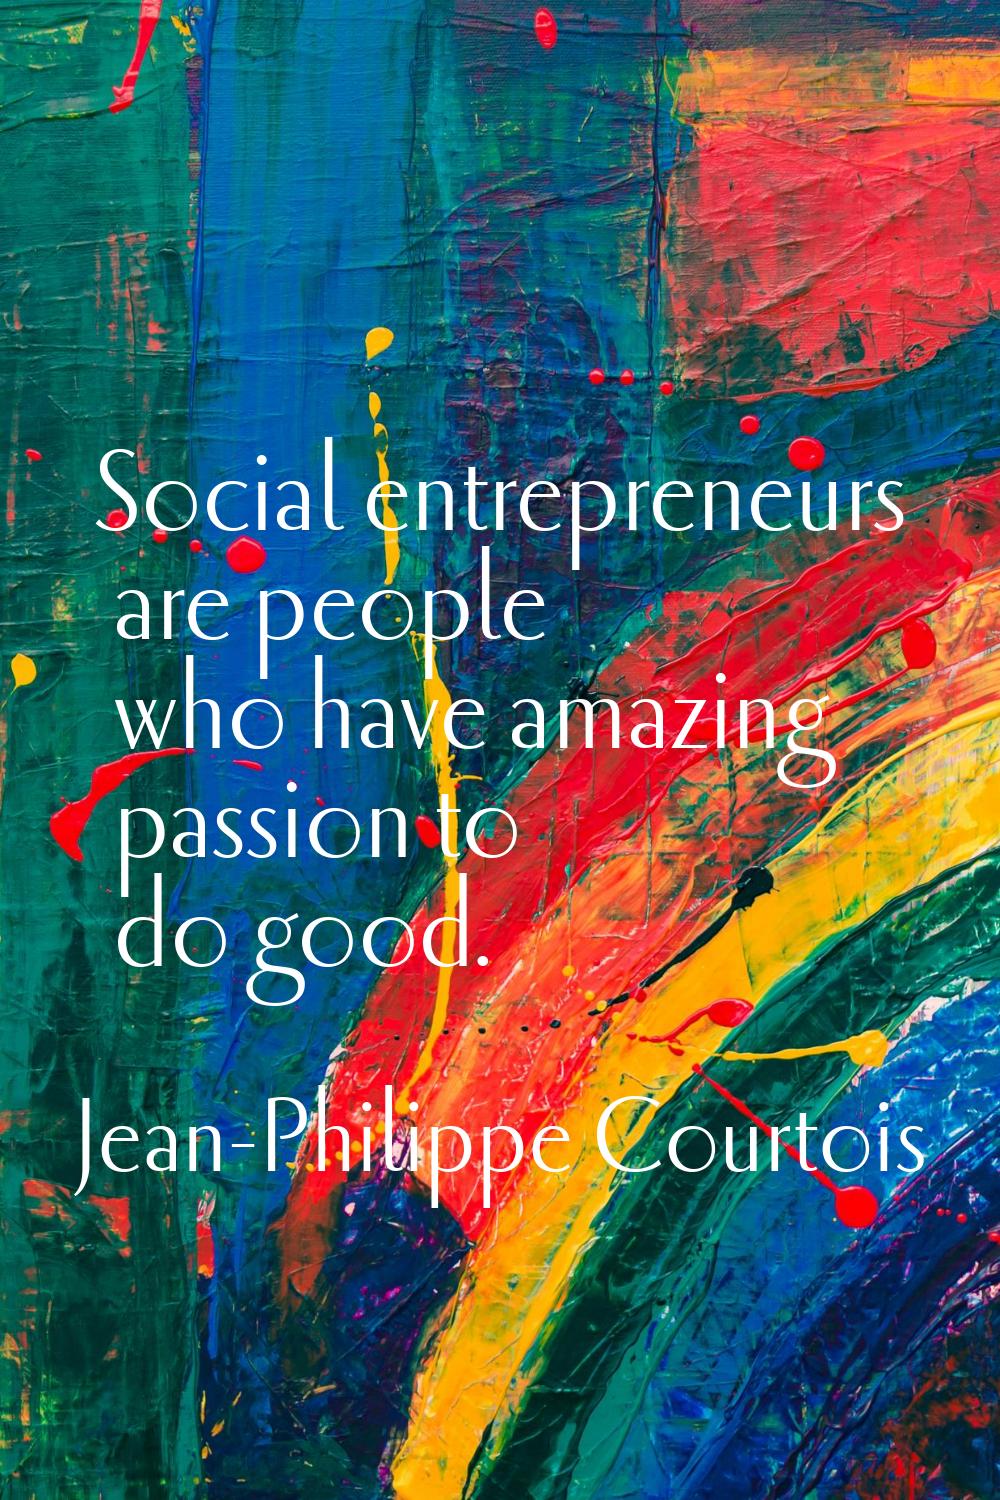 Social entrepreneurs are people who have amazing passion to do good.